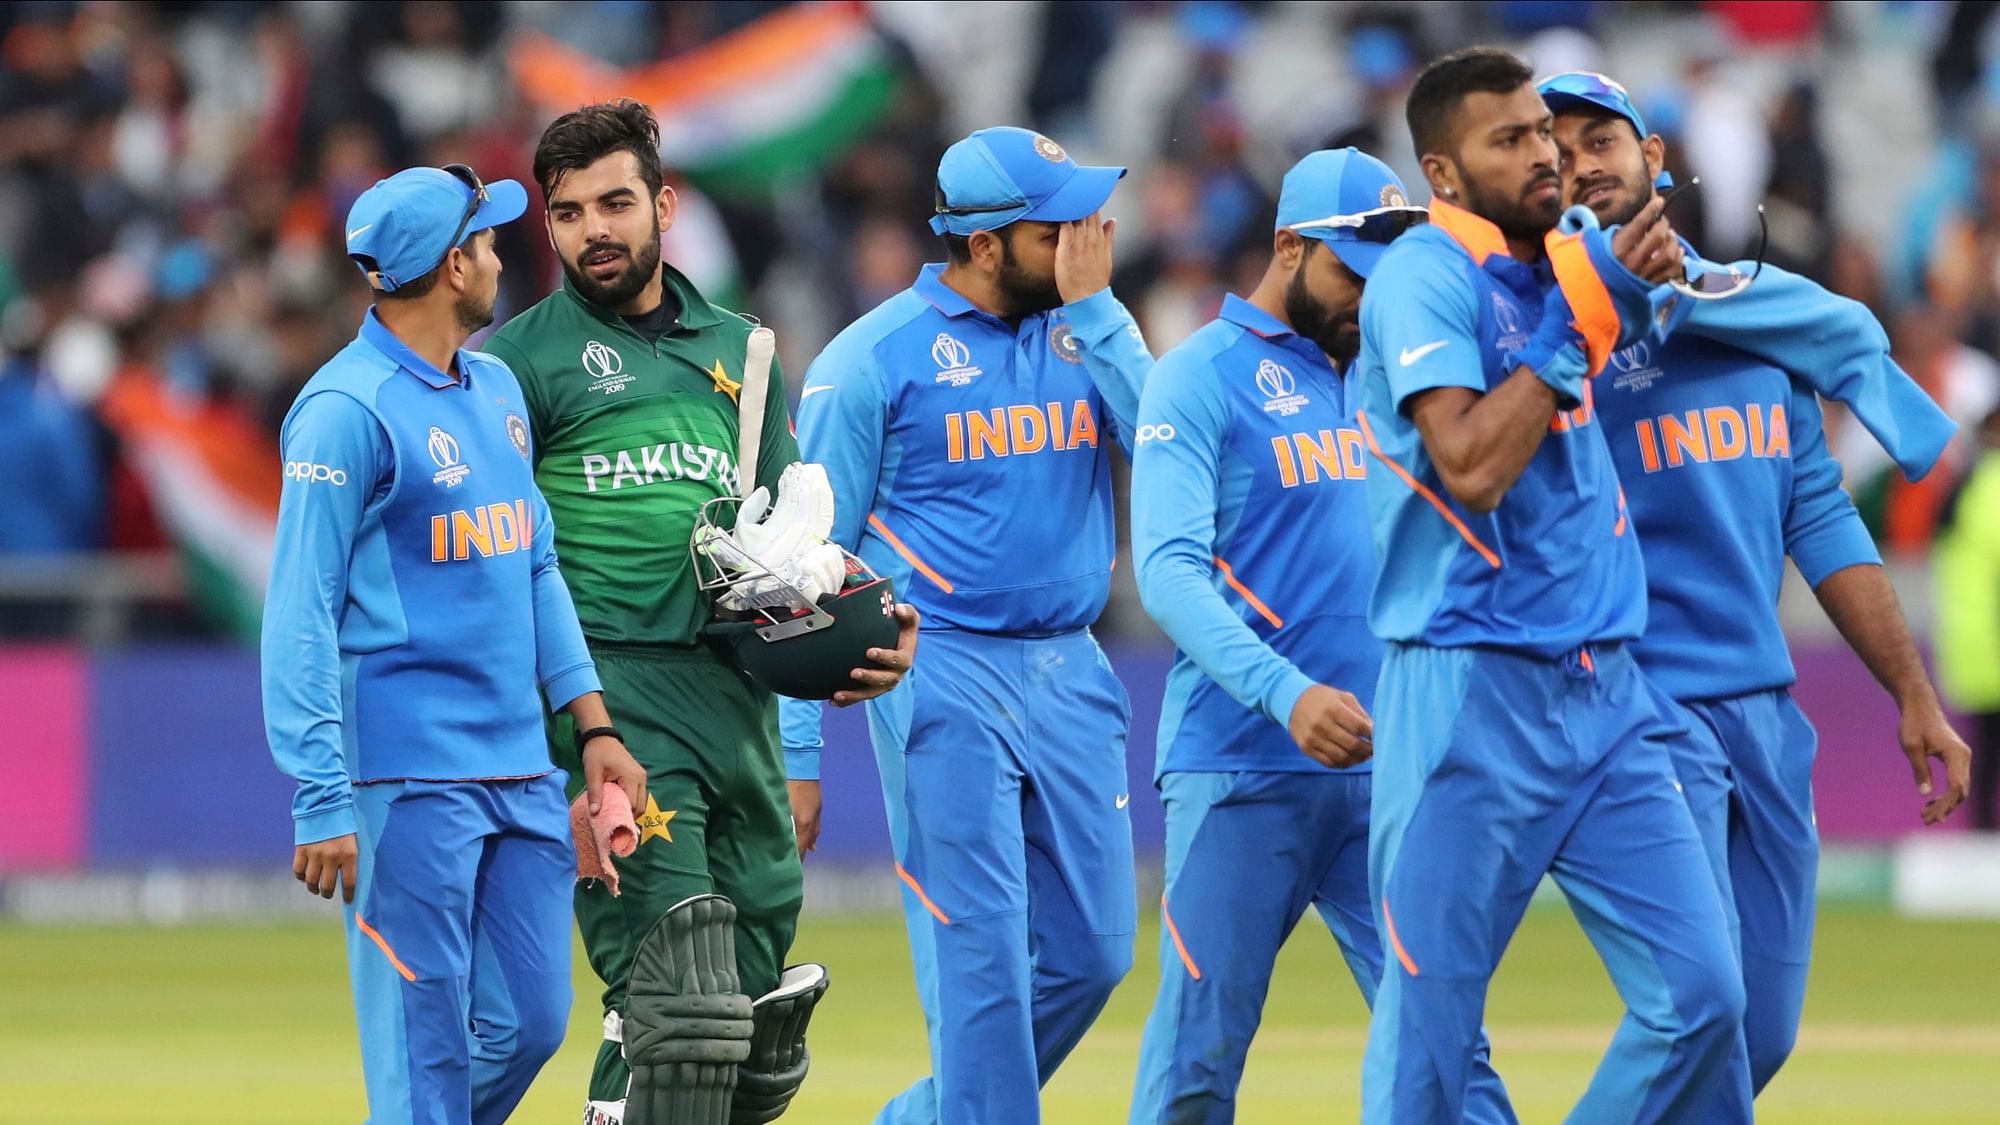 India beat Pakistan by 89 runs in the 2019 ICC World Cup.